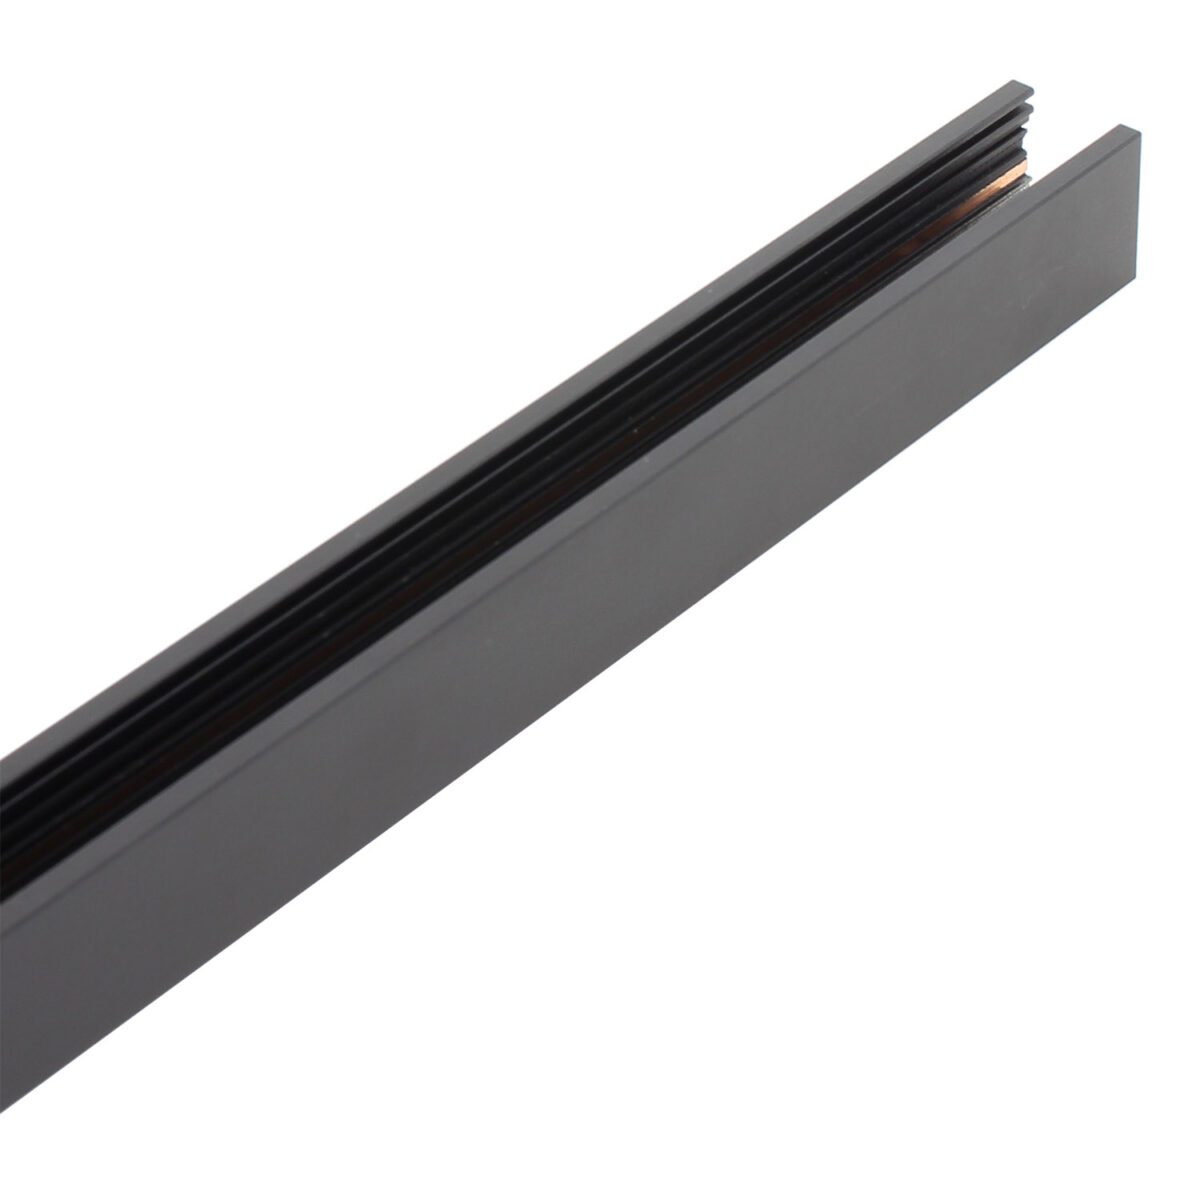 MAGNETIC TRACK 16mm Ultra Thin superficie Carril negro 2m